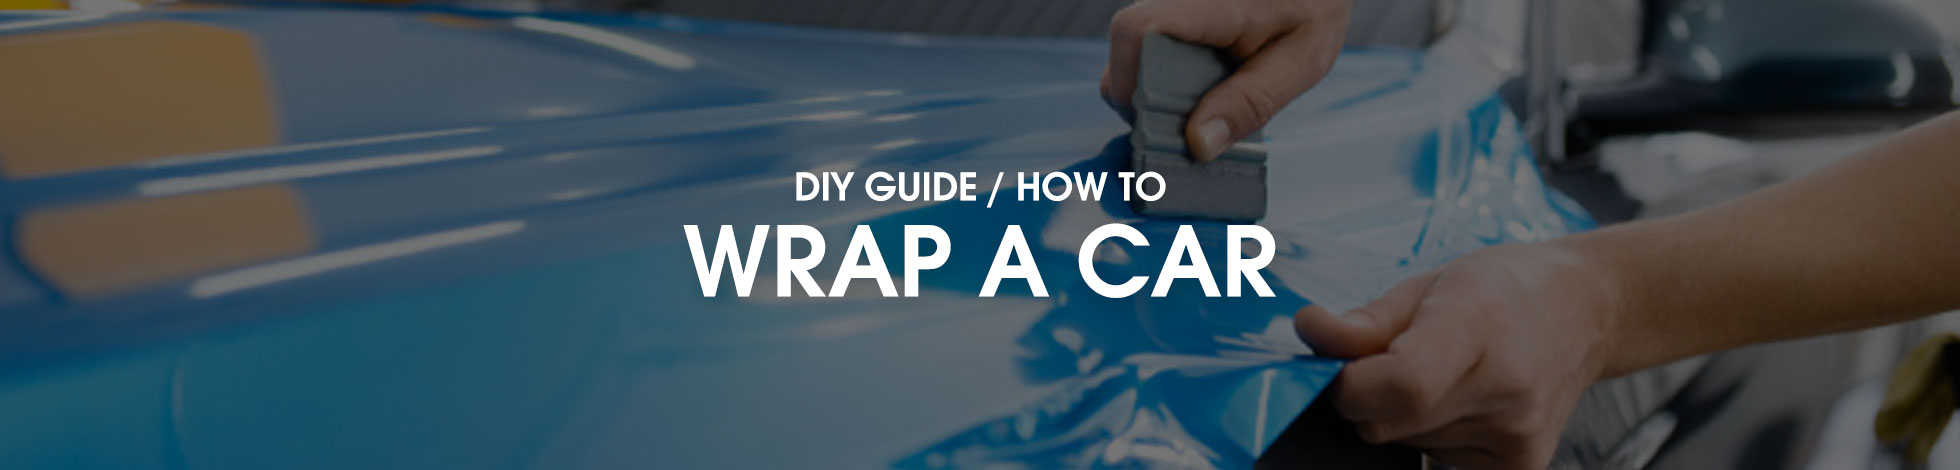 How to Wrap A Car